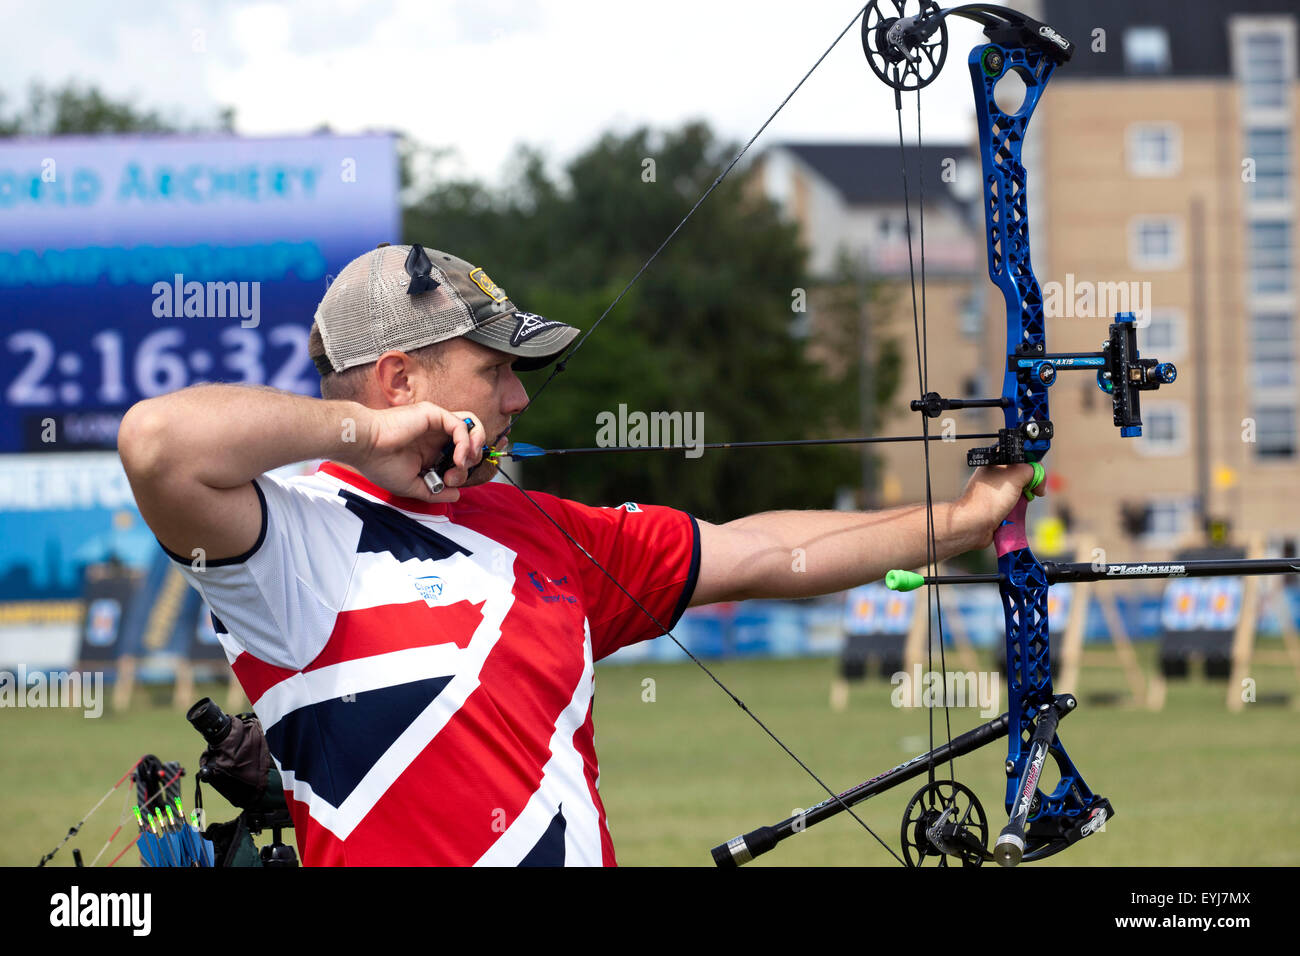 Copenhagen, Denmark, July 30th, 2015: British archer Adam Ravenscroft competes in the World Archery Championships in Copenhagen during Thursday's individual matches compound bow. Credit:  OJPHOTOS/Alamy Live News Stock Photo